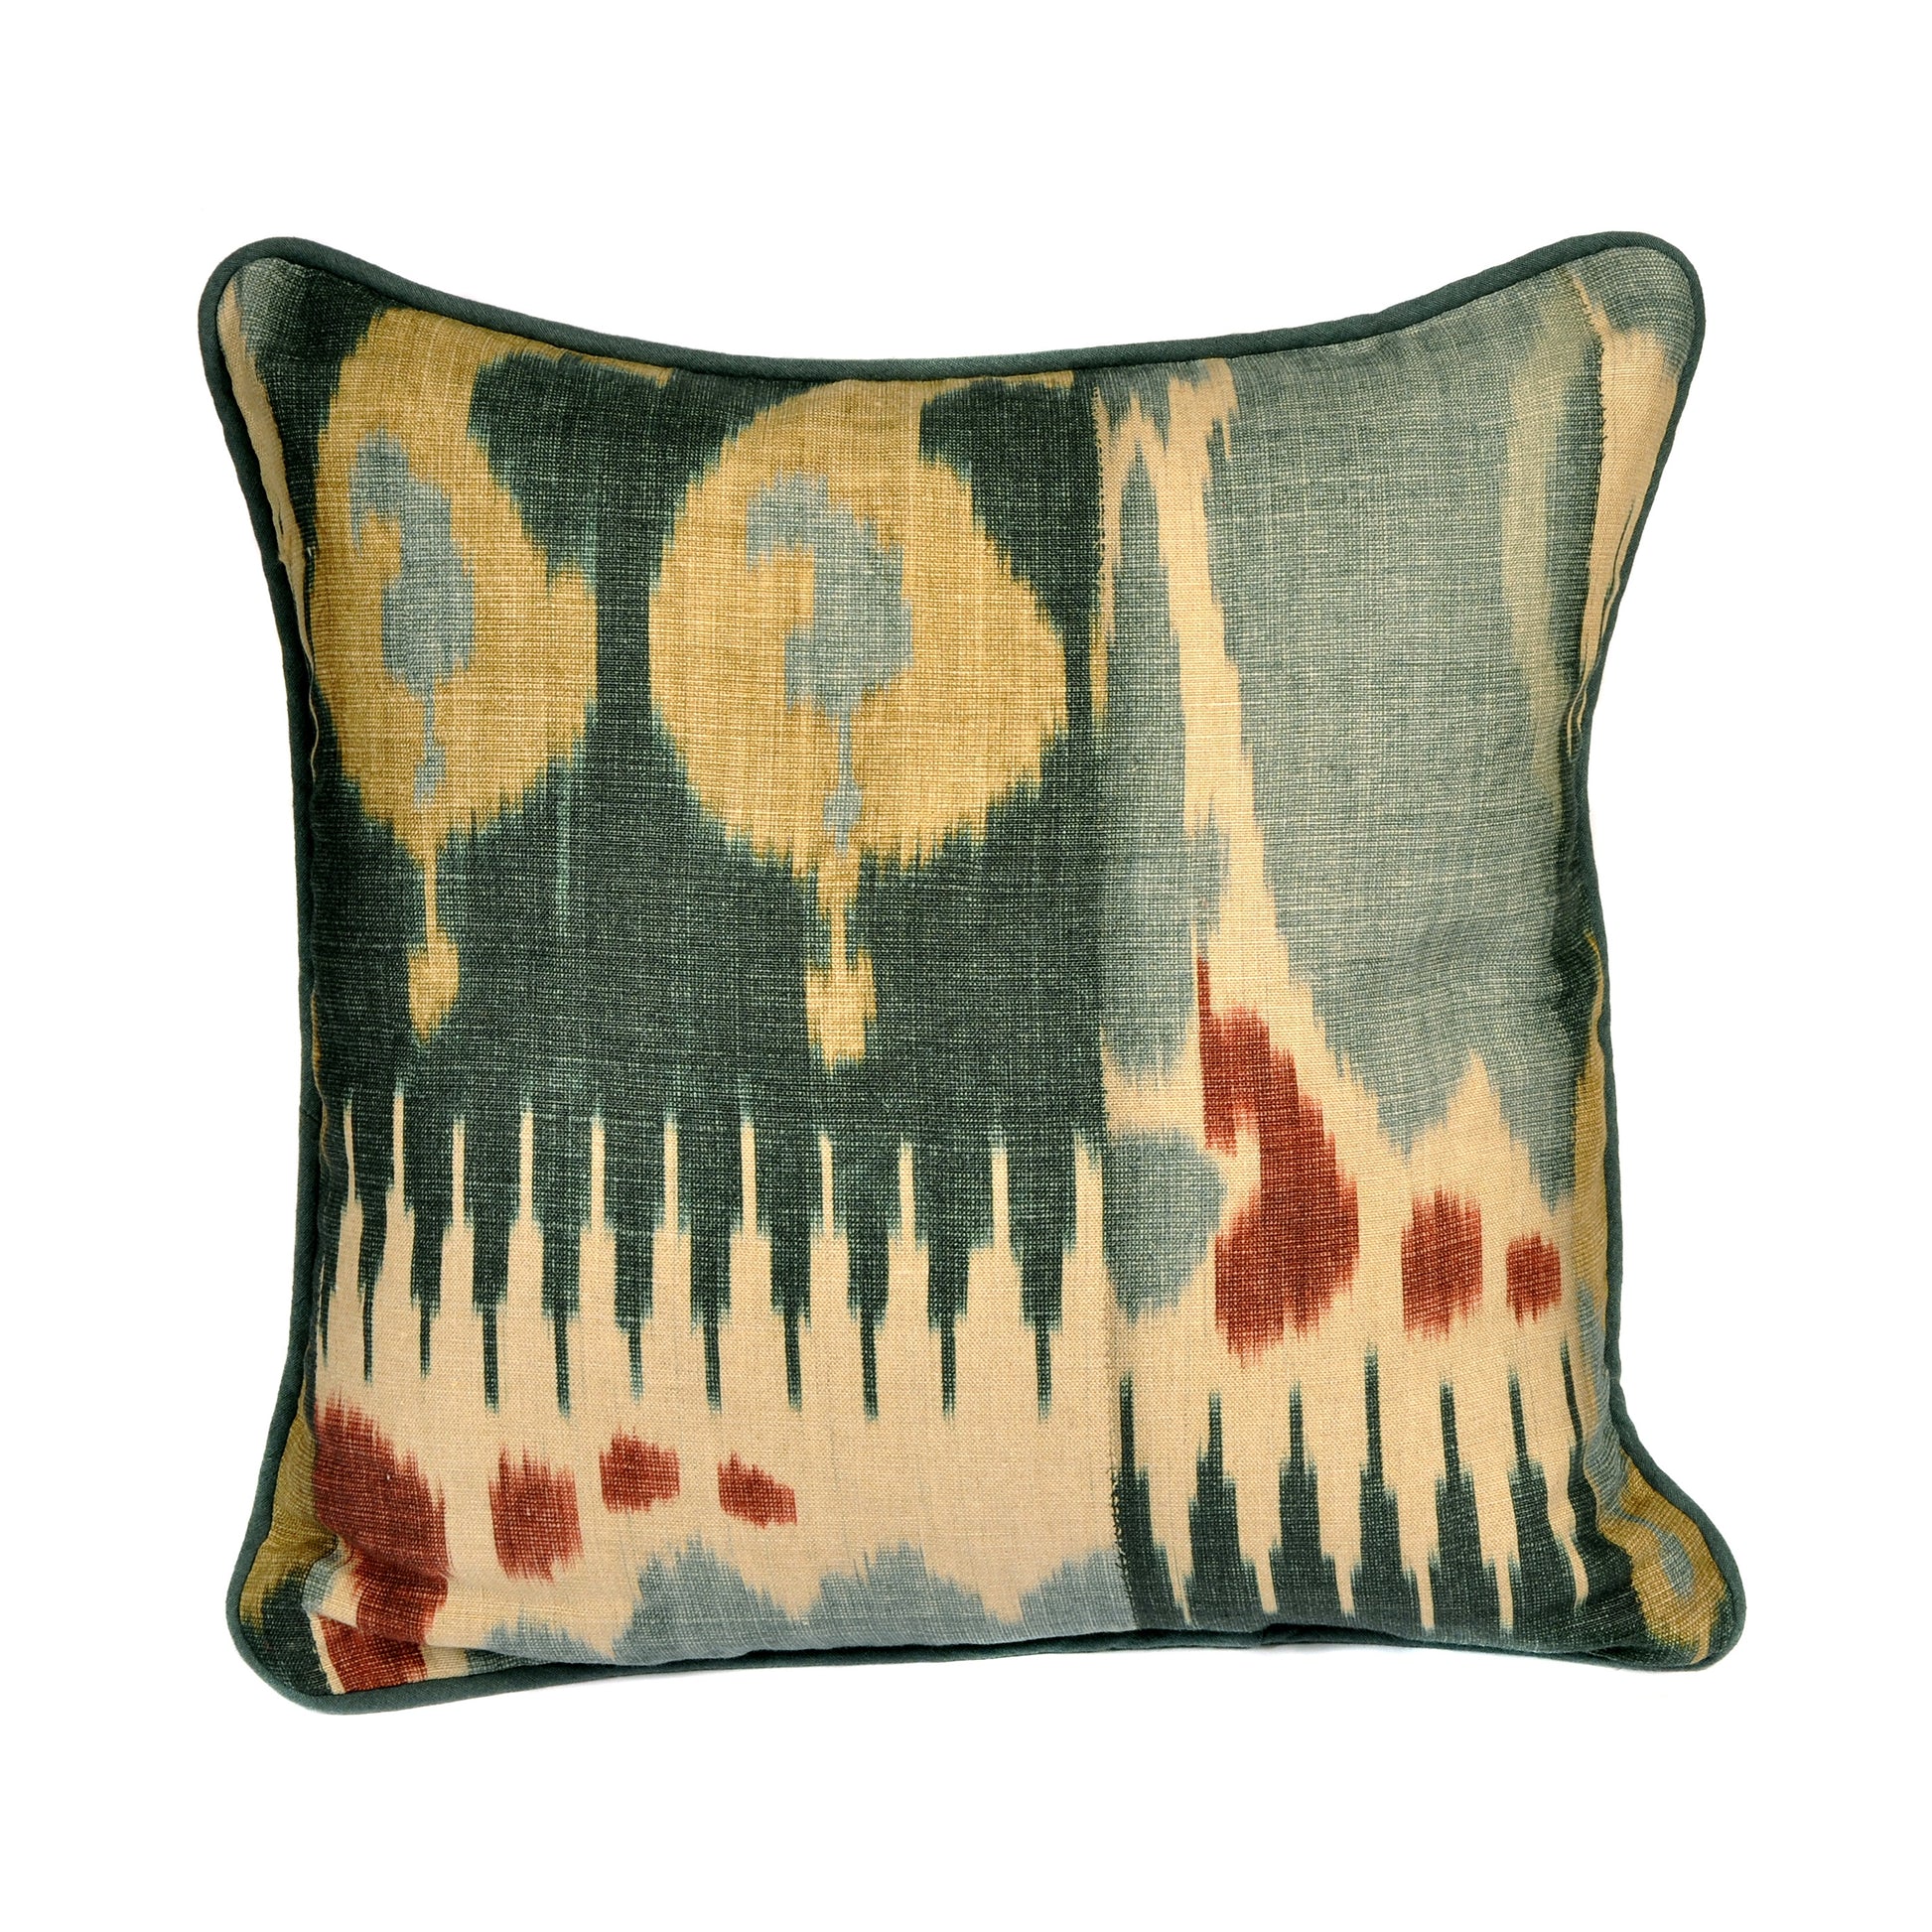 Lewis & Wood Kimono Fabric Square Cushion Not specified